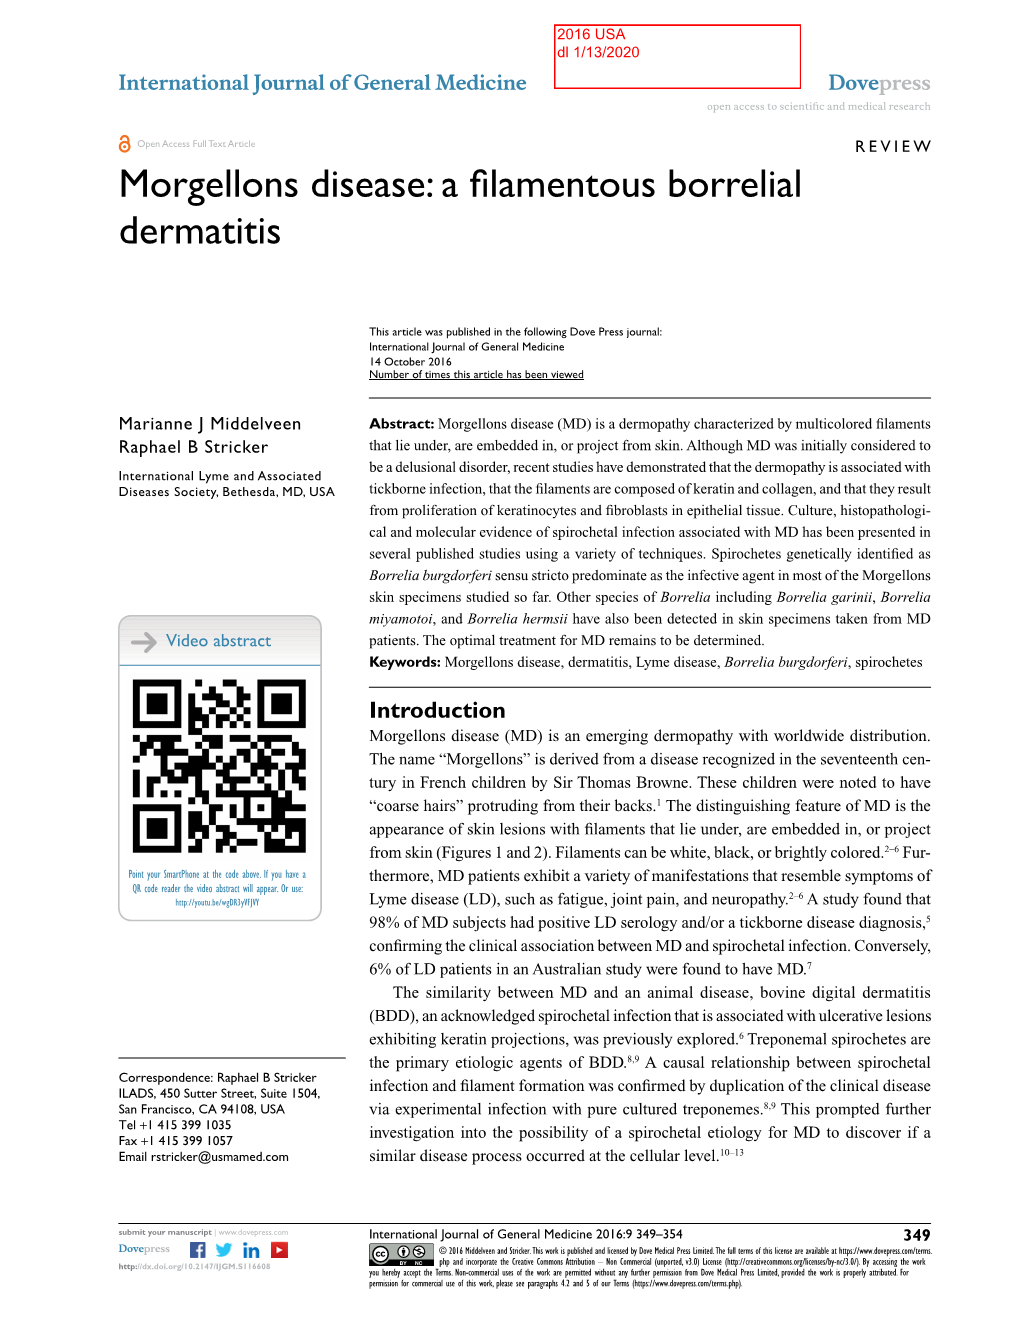 Morgellons Disease Open Access to Scientific and Medical Research DOI